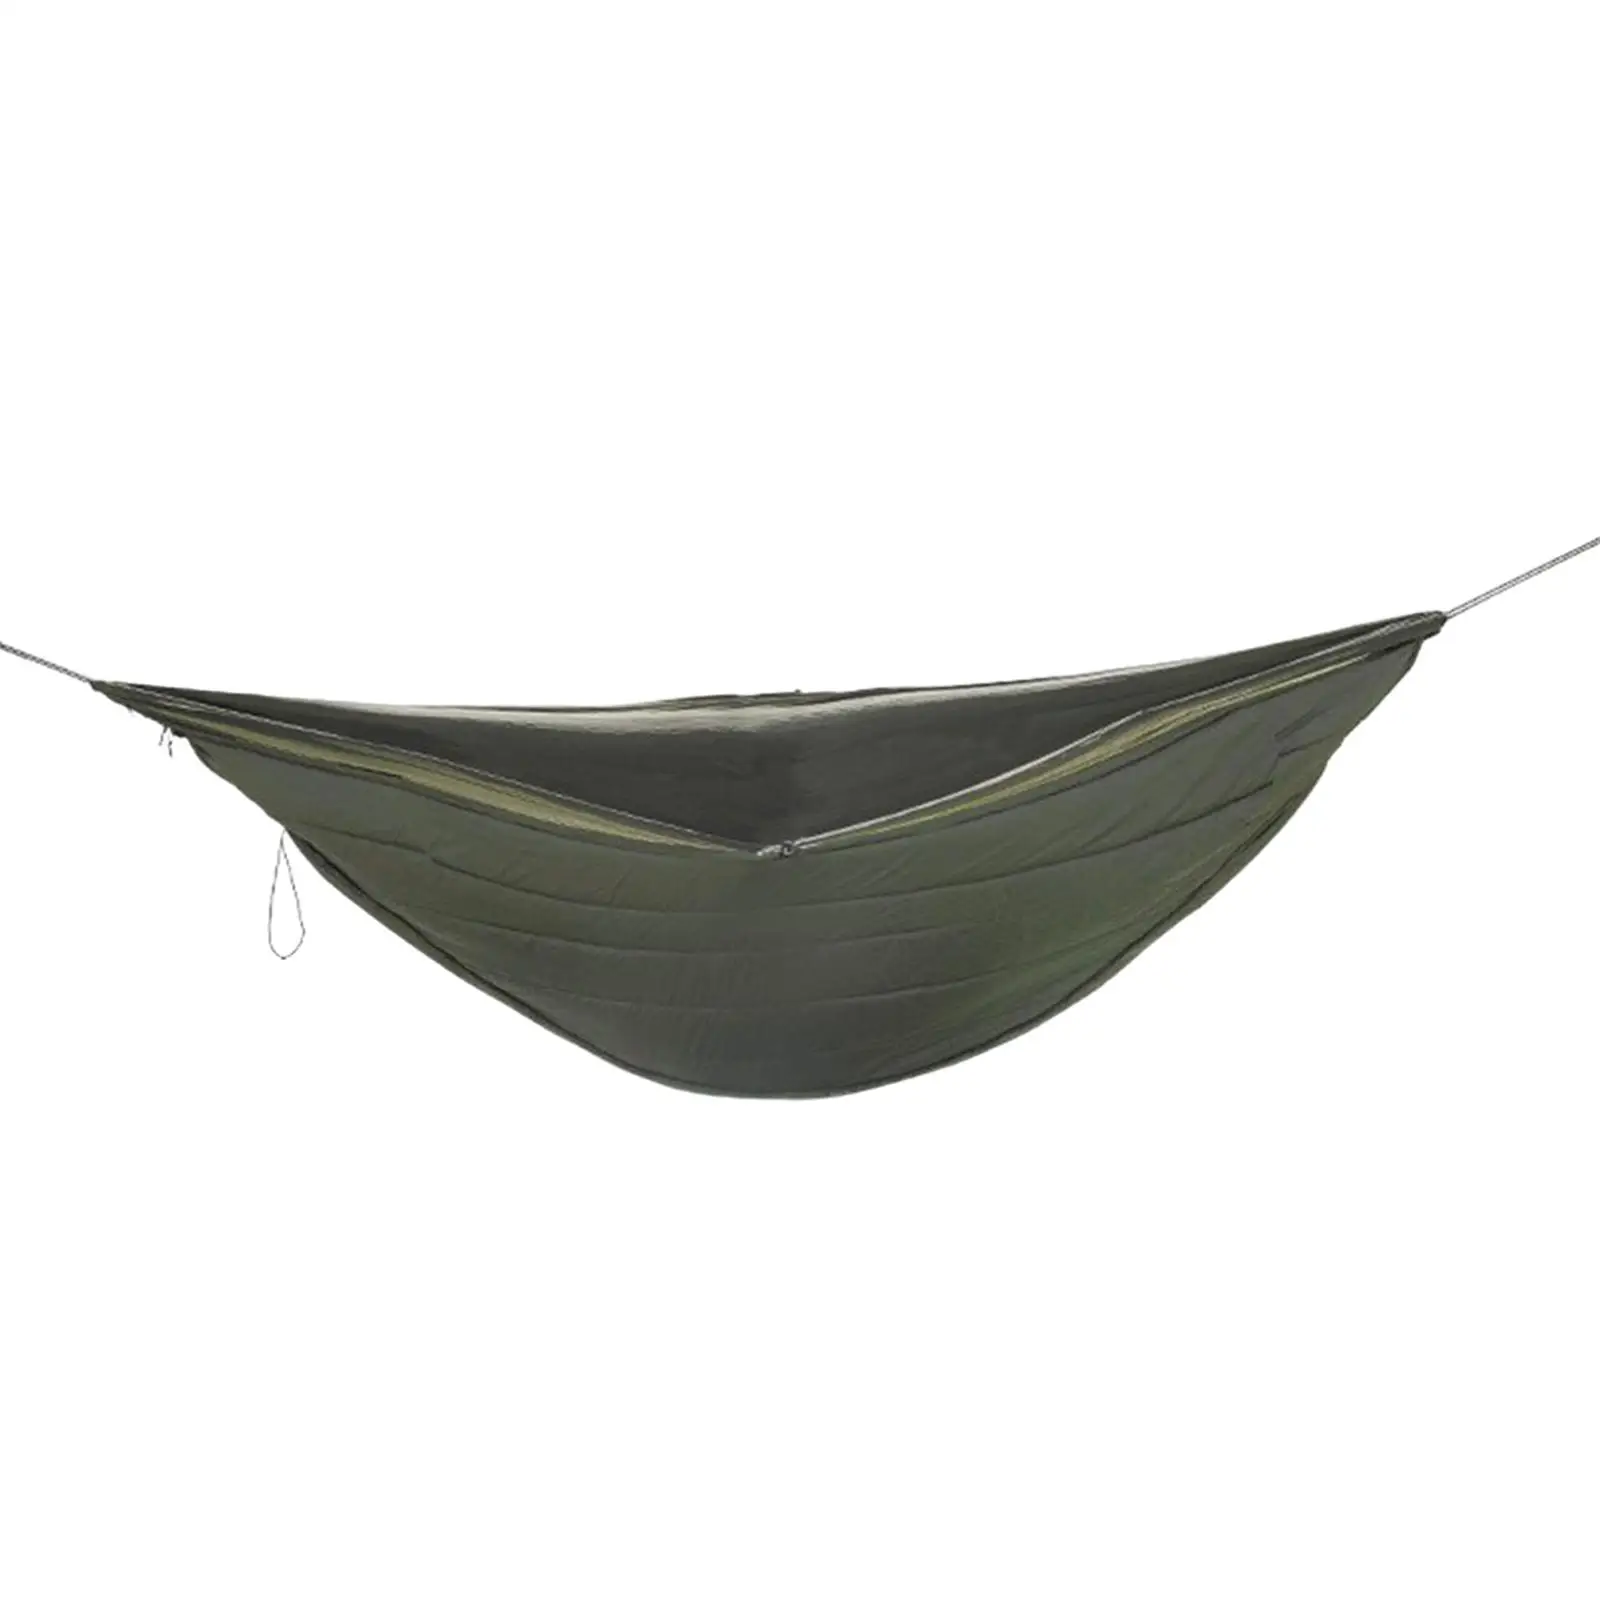 Winter Outdoor Hammock Underquilt Ultralight Warm Insulated for Backpacking